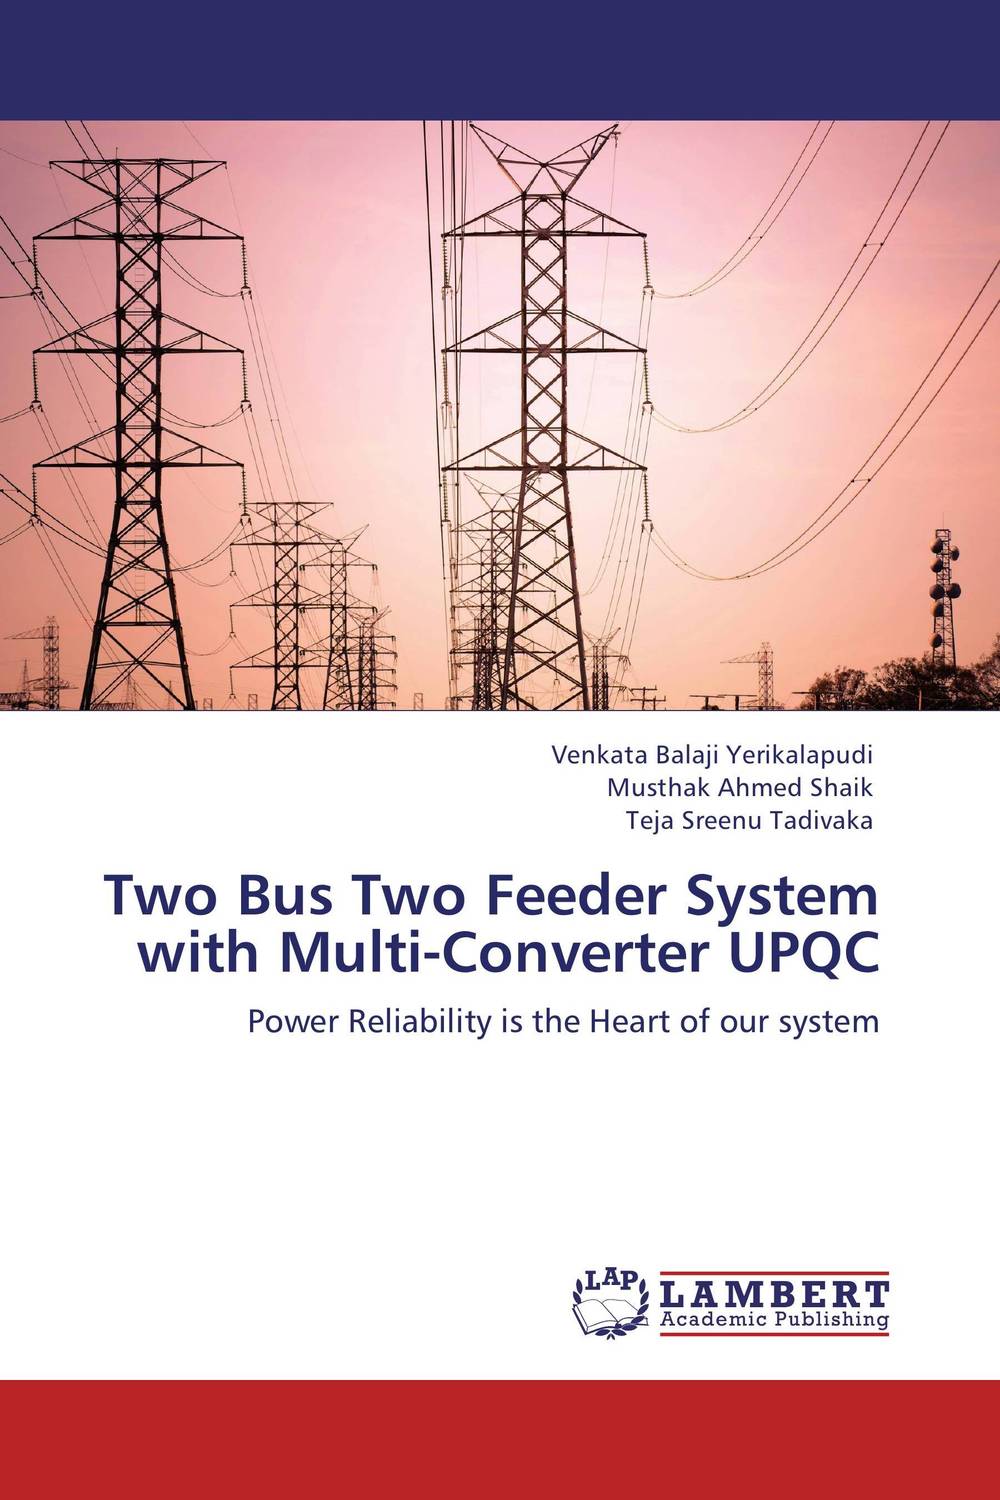 Two Bus Two Feeder System with Multi-Converter UPQC